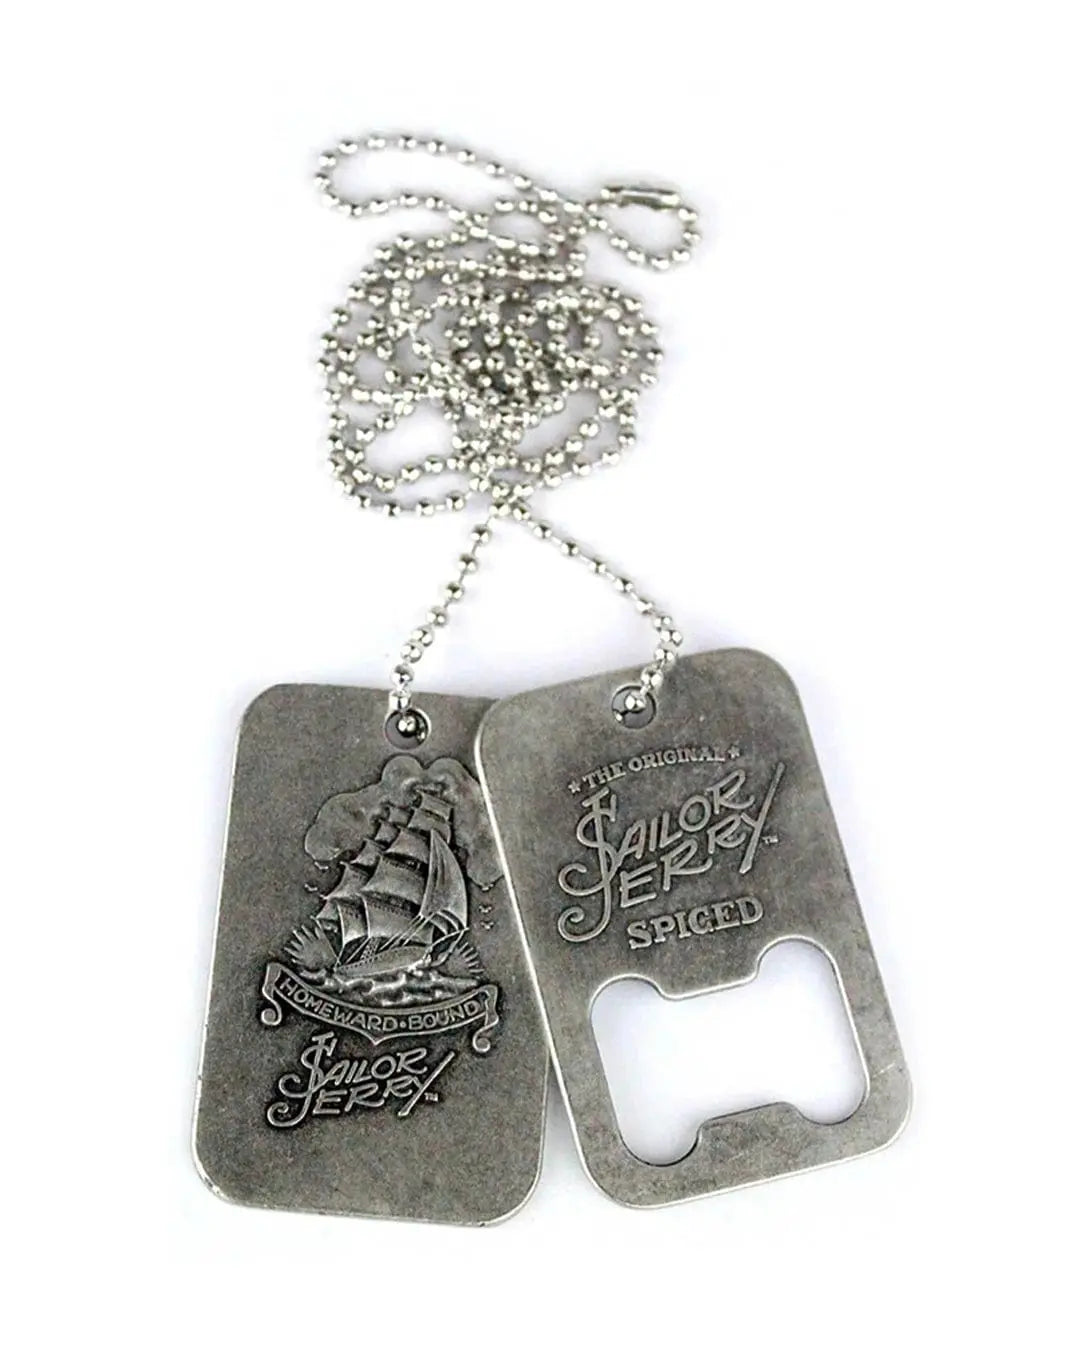 Sailor Jerry Dog Tags Gift Boxes